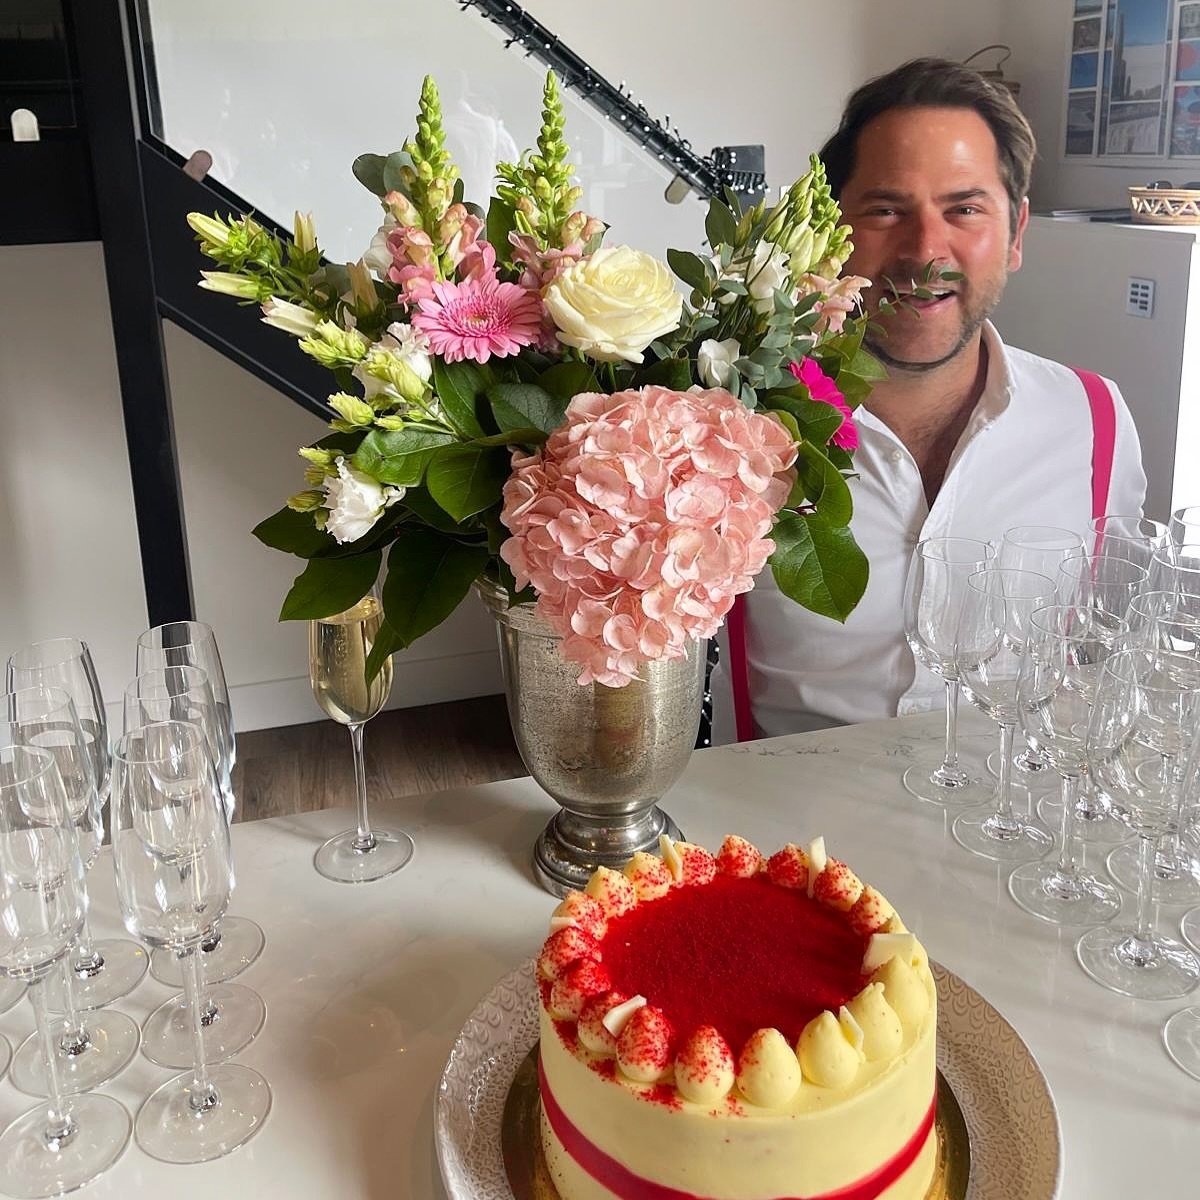 Champagne, flowers and red velvet cake a few of my favourite things in life. Thank you to my amazing family for the beautiful flowers @fabulousfloristrybycarla and delicious cake @nikkis_bakery_chiswick for my birthday recently 🩷